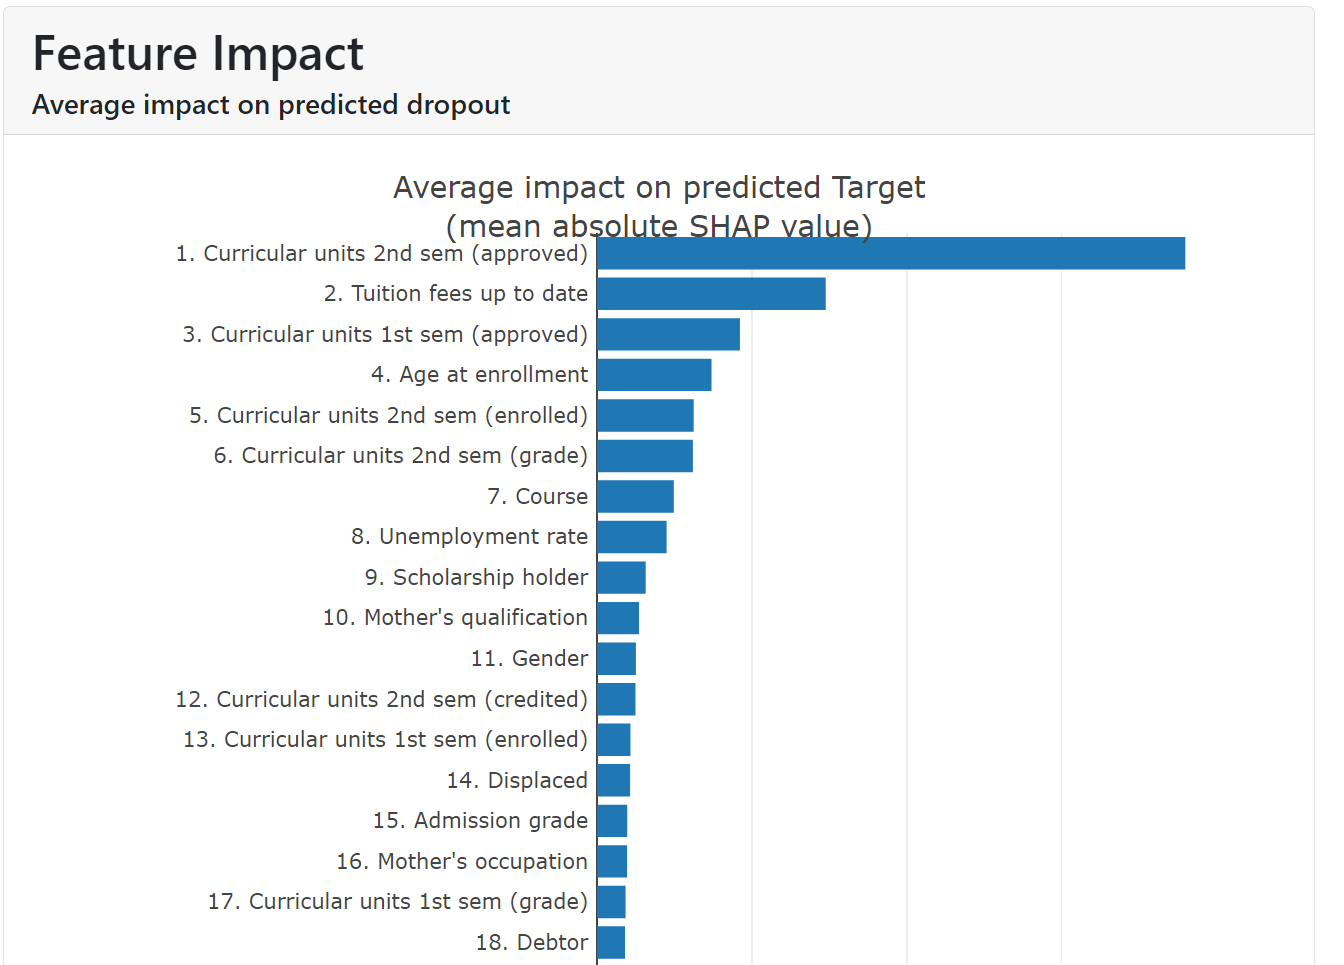 Feature Impact tab.
It shows the values of the average importance of each attribute.